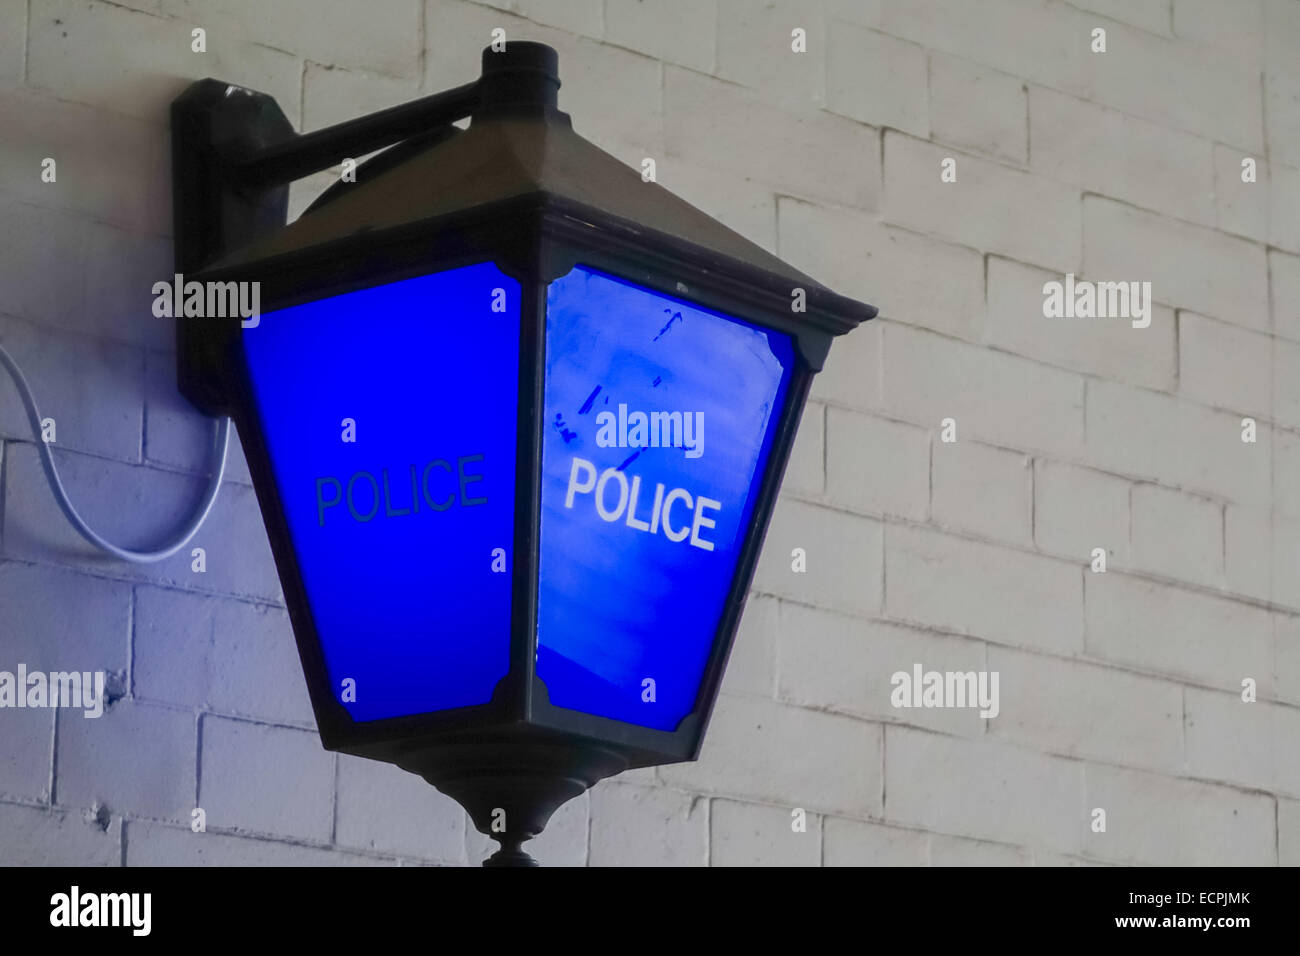 Blue Police station lamp in situ from the era of Dixon of Dock Green still functioning at Bradford City Hall Stock Photo